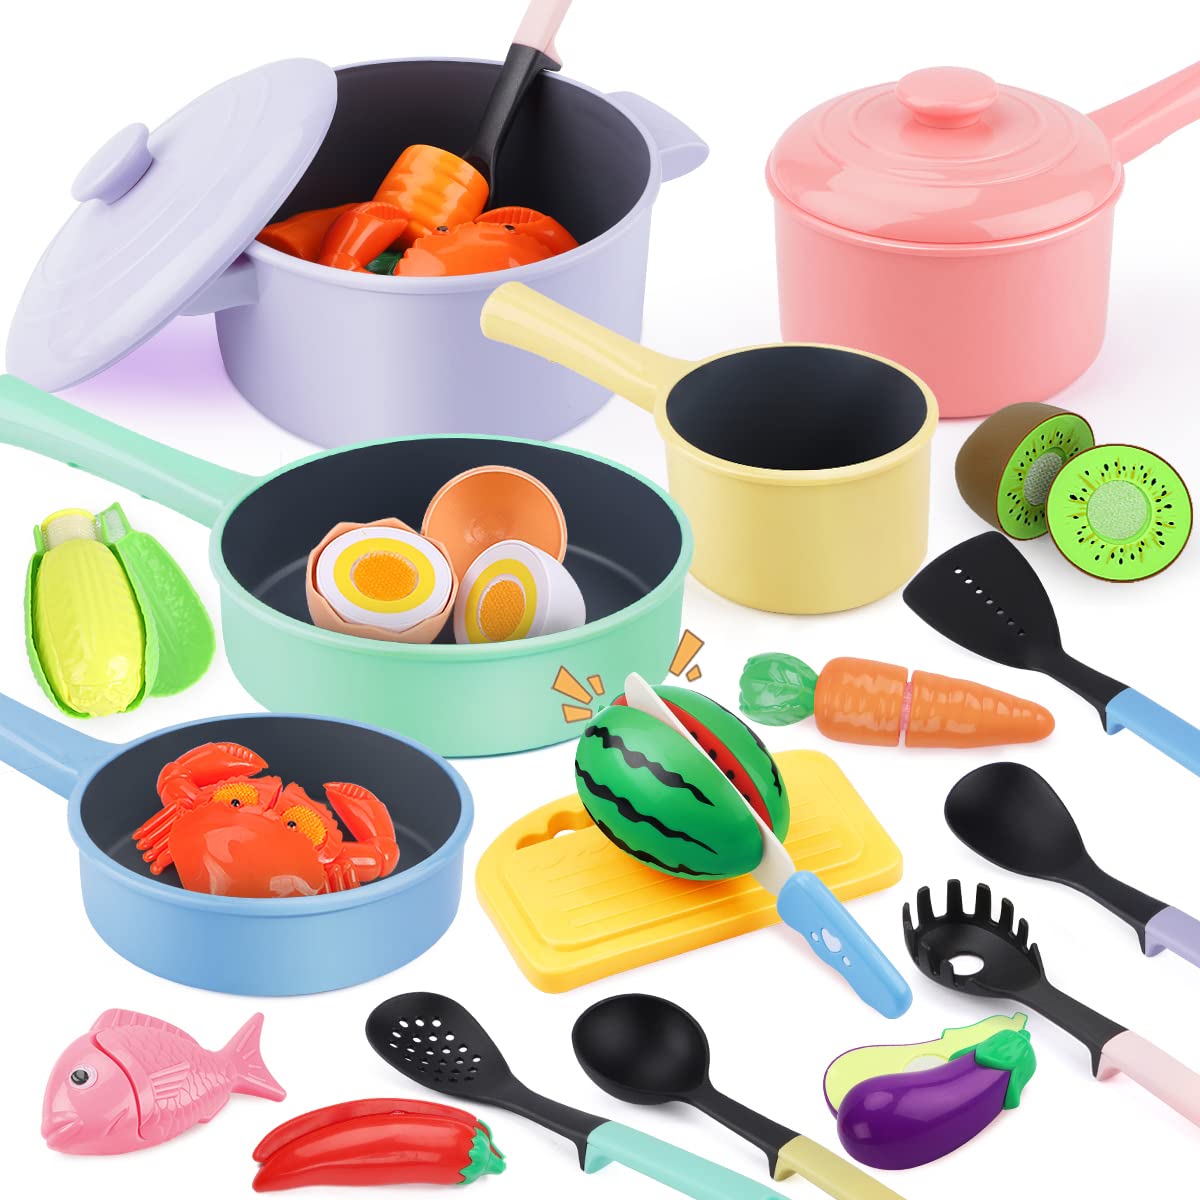 gILOBABY Play Kitchen Accessories, Play Food Sets for Kids Kitchen Playset with Pots and Pans Set, cooking Utensils, Montessori 